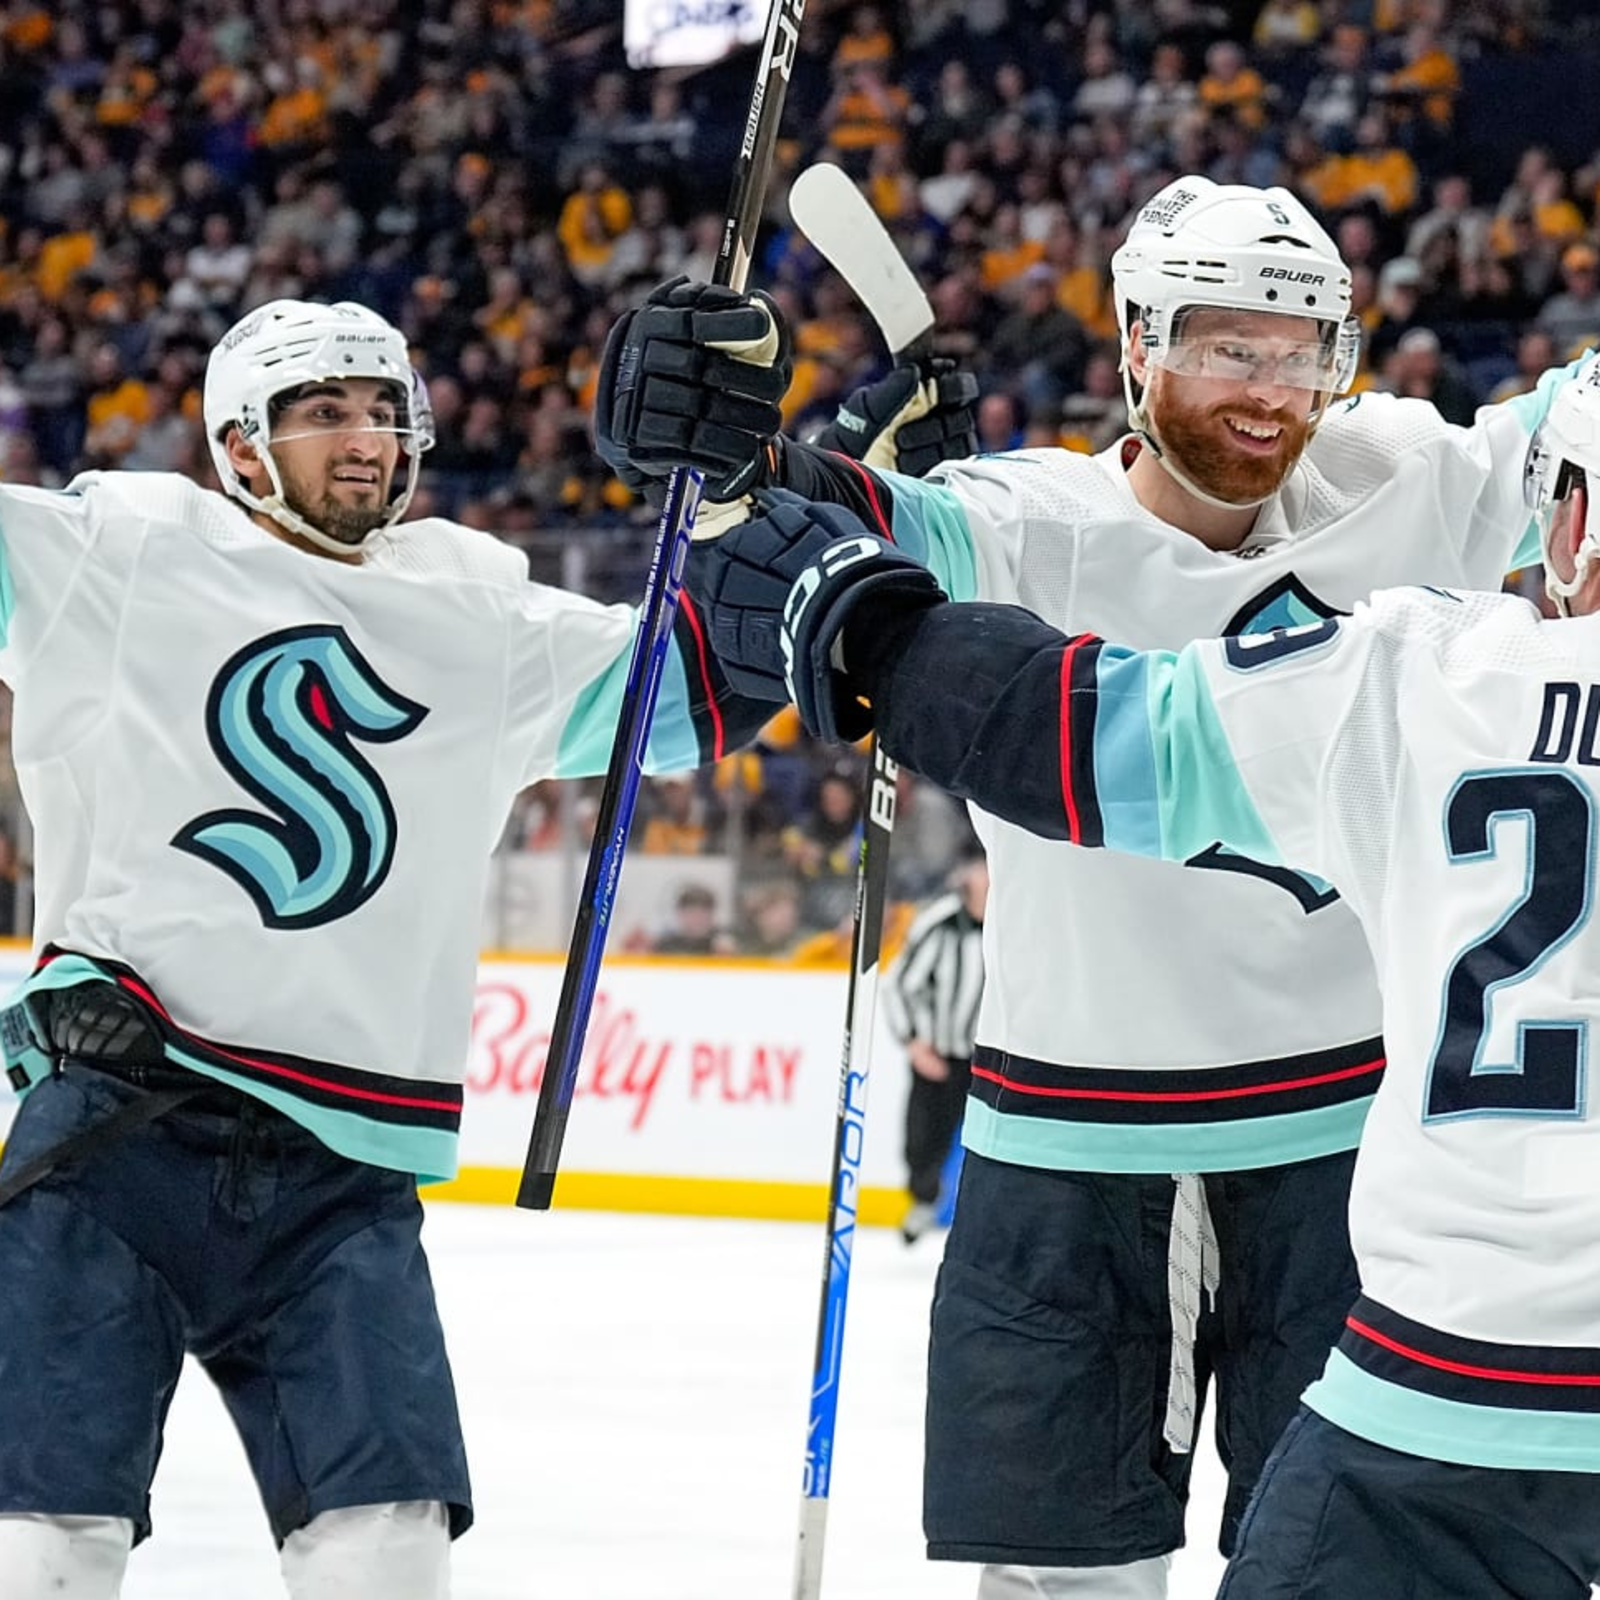 2023 NHL Central Division Title Odds and Favorites: Avs With Big Lead